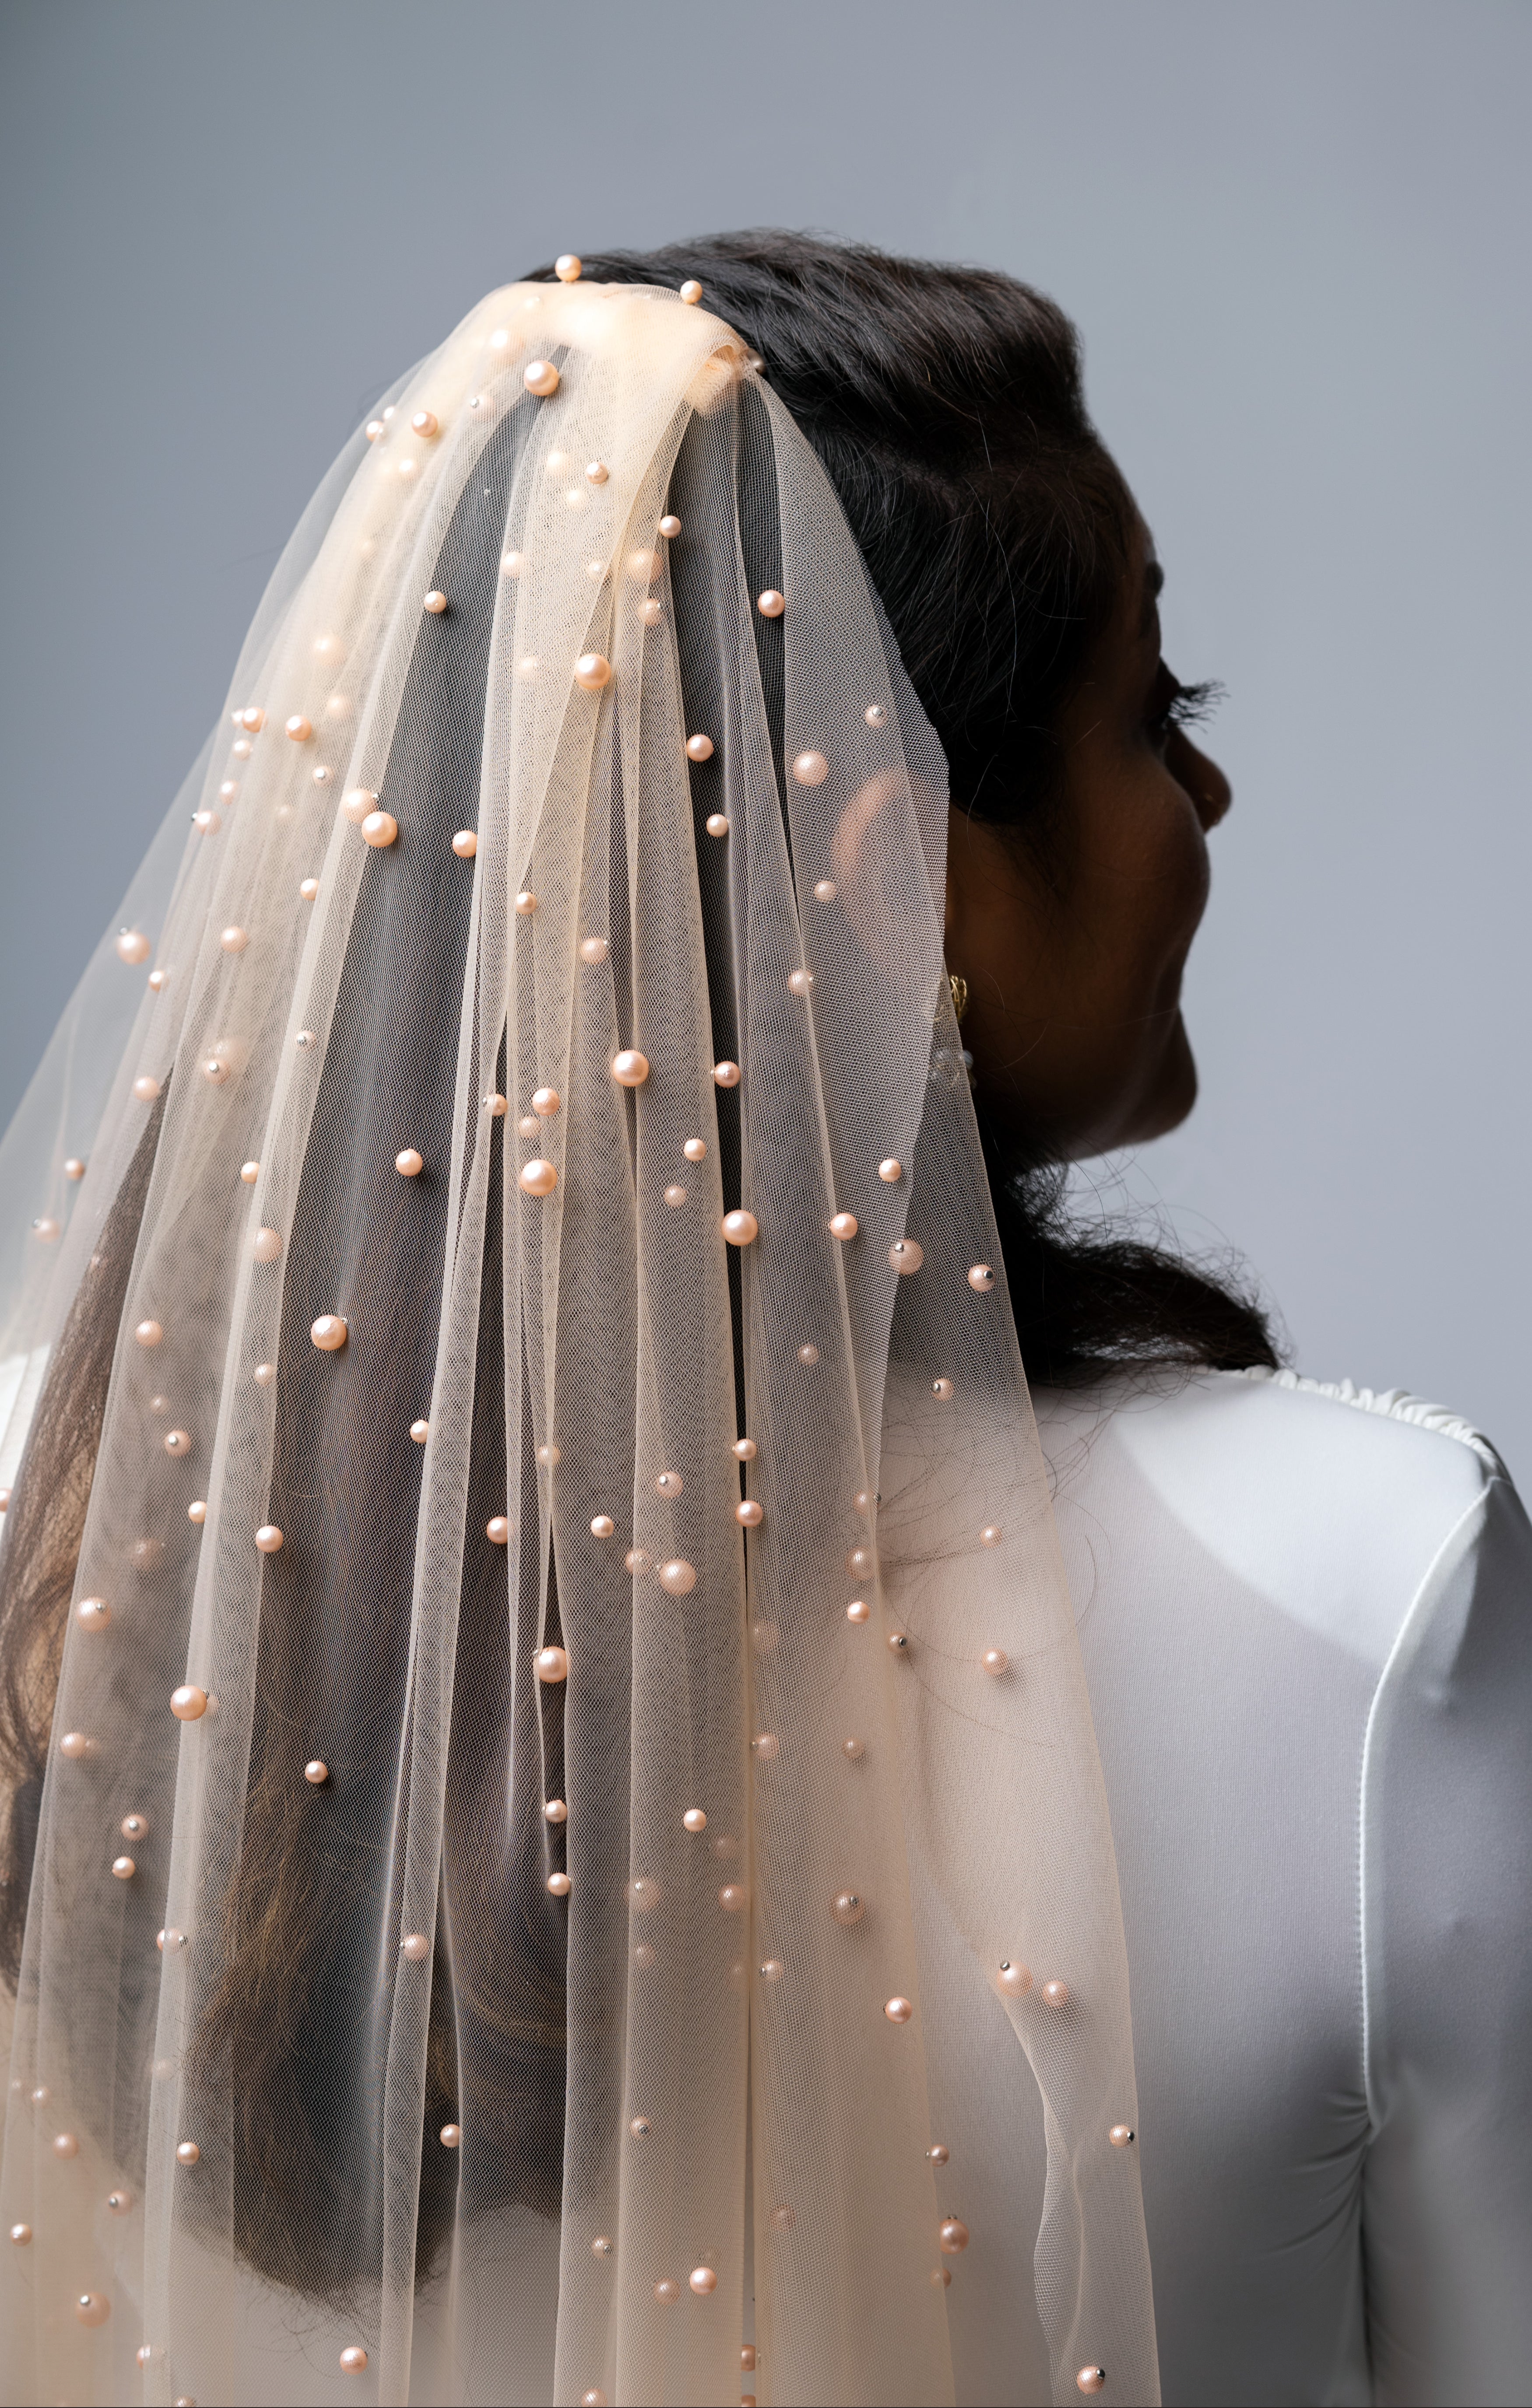 LUMIERE | fingertip veil with pearls